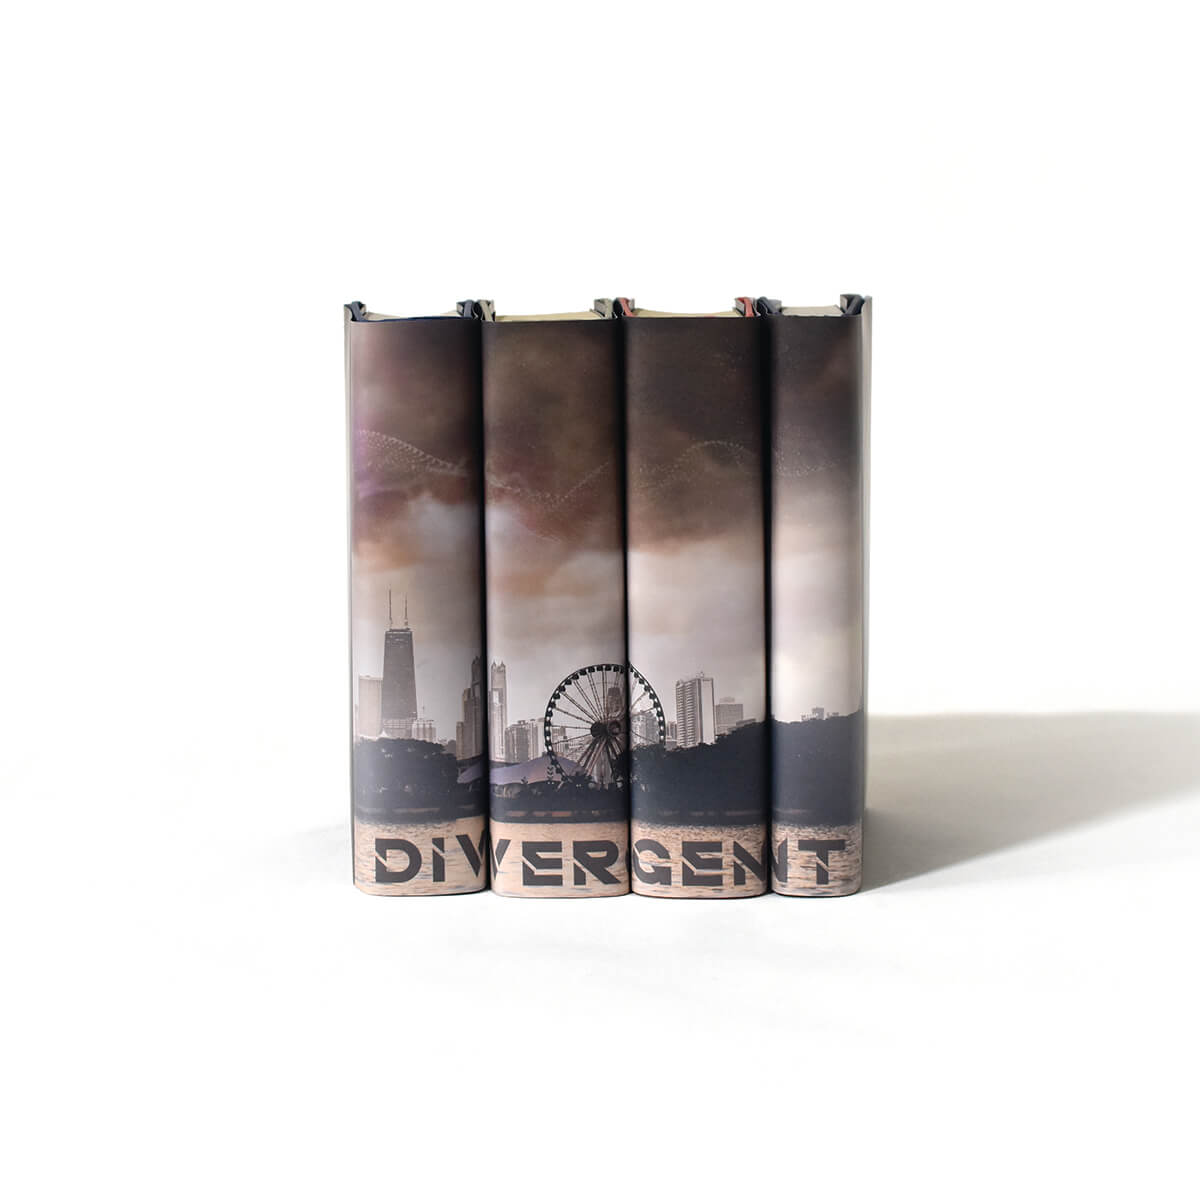 Experience the post-apocalyptic Divergent series with our made-to-order book set. Featuring hardcovers published by HarperCollins in custom-printed jackets, this is the perfect way to explore Veronica Roth's universe. JuniperCustom book jackets make your favorite books into a lifelong treasure of a collection.